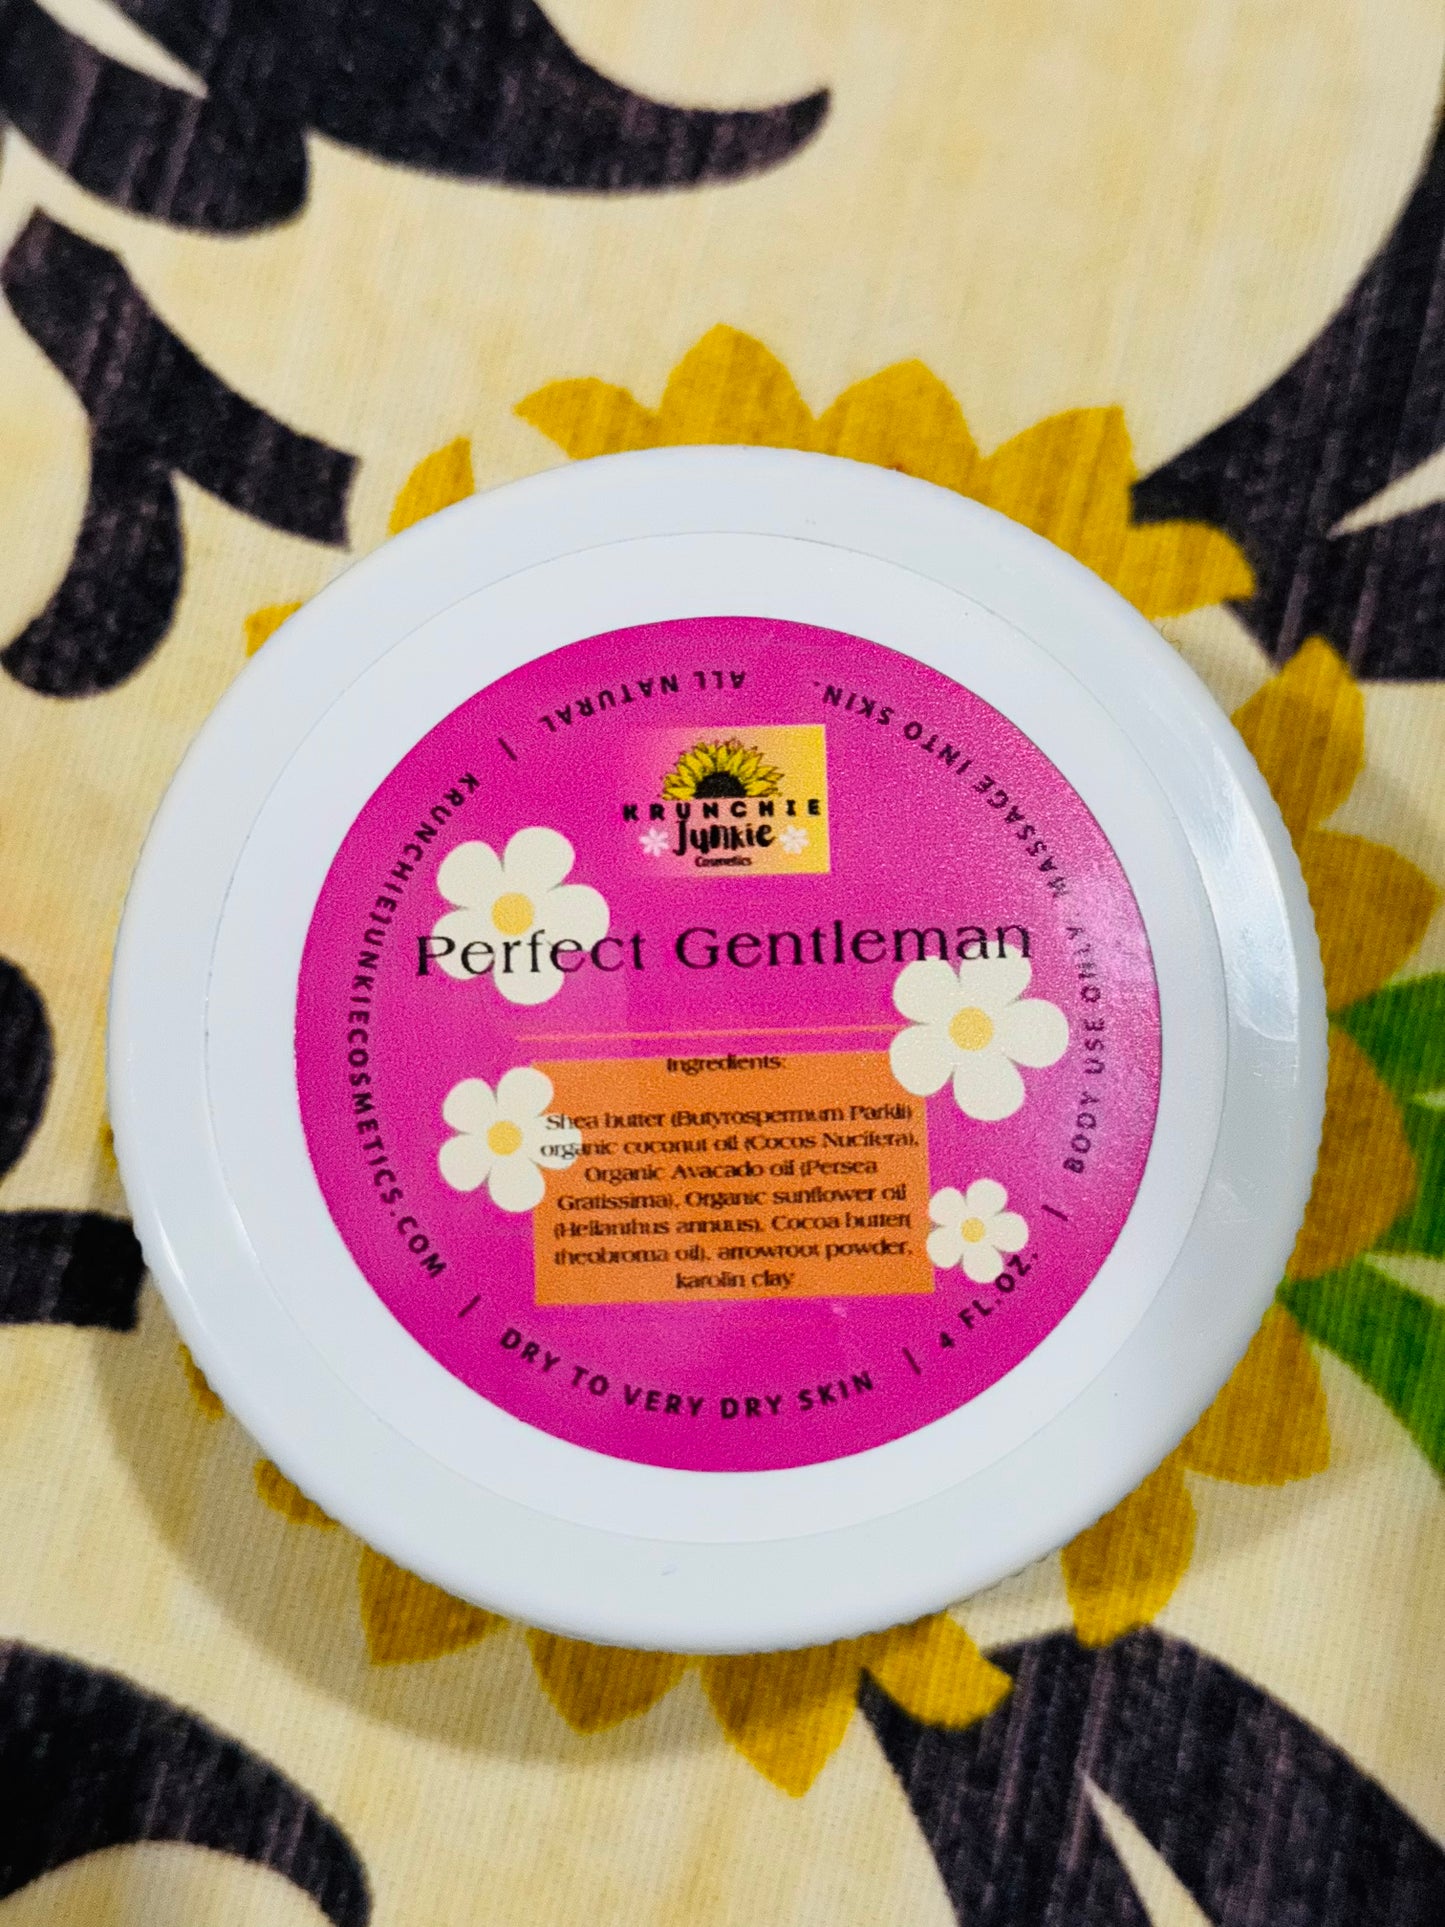 "Perfect Gentleman" Whipped Body Butter